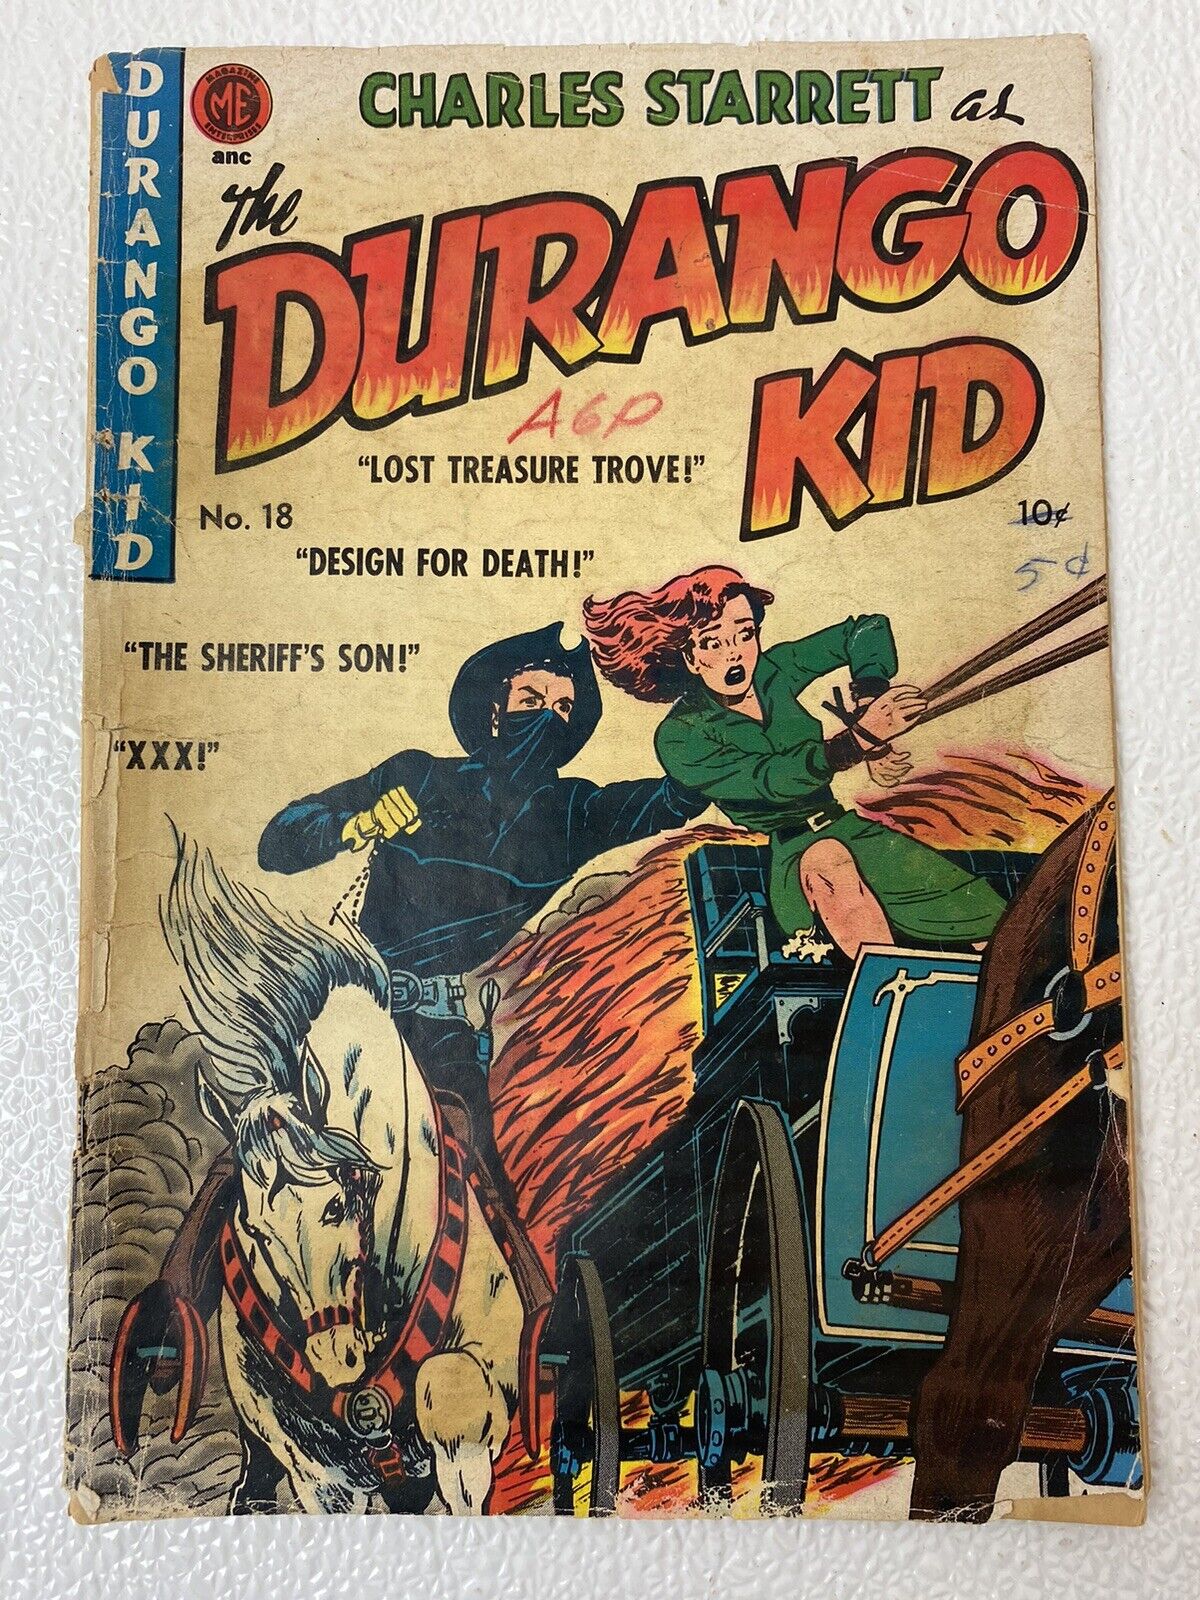 The Durango Kid #18 Aug 1952 - Western Golden Age Comic Book Boarded